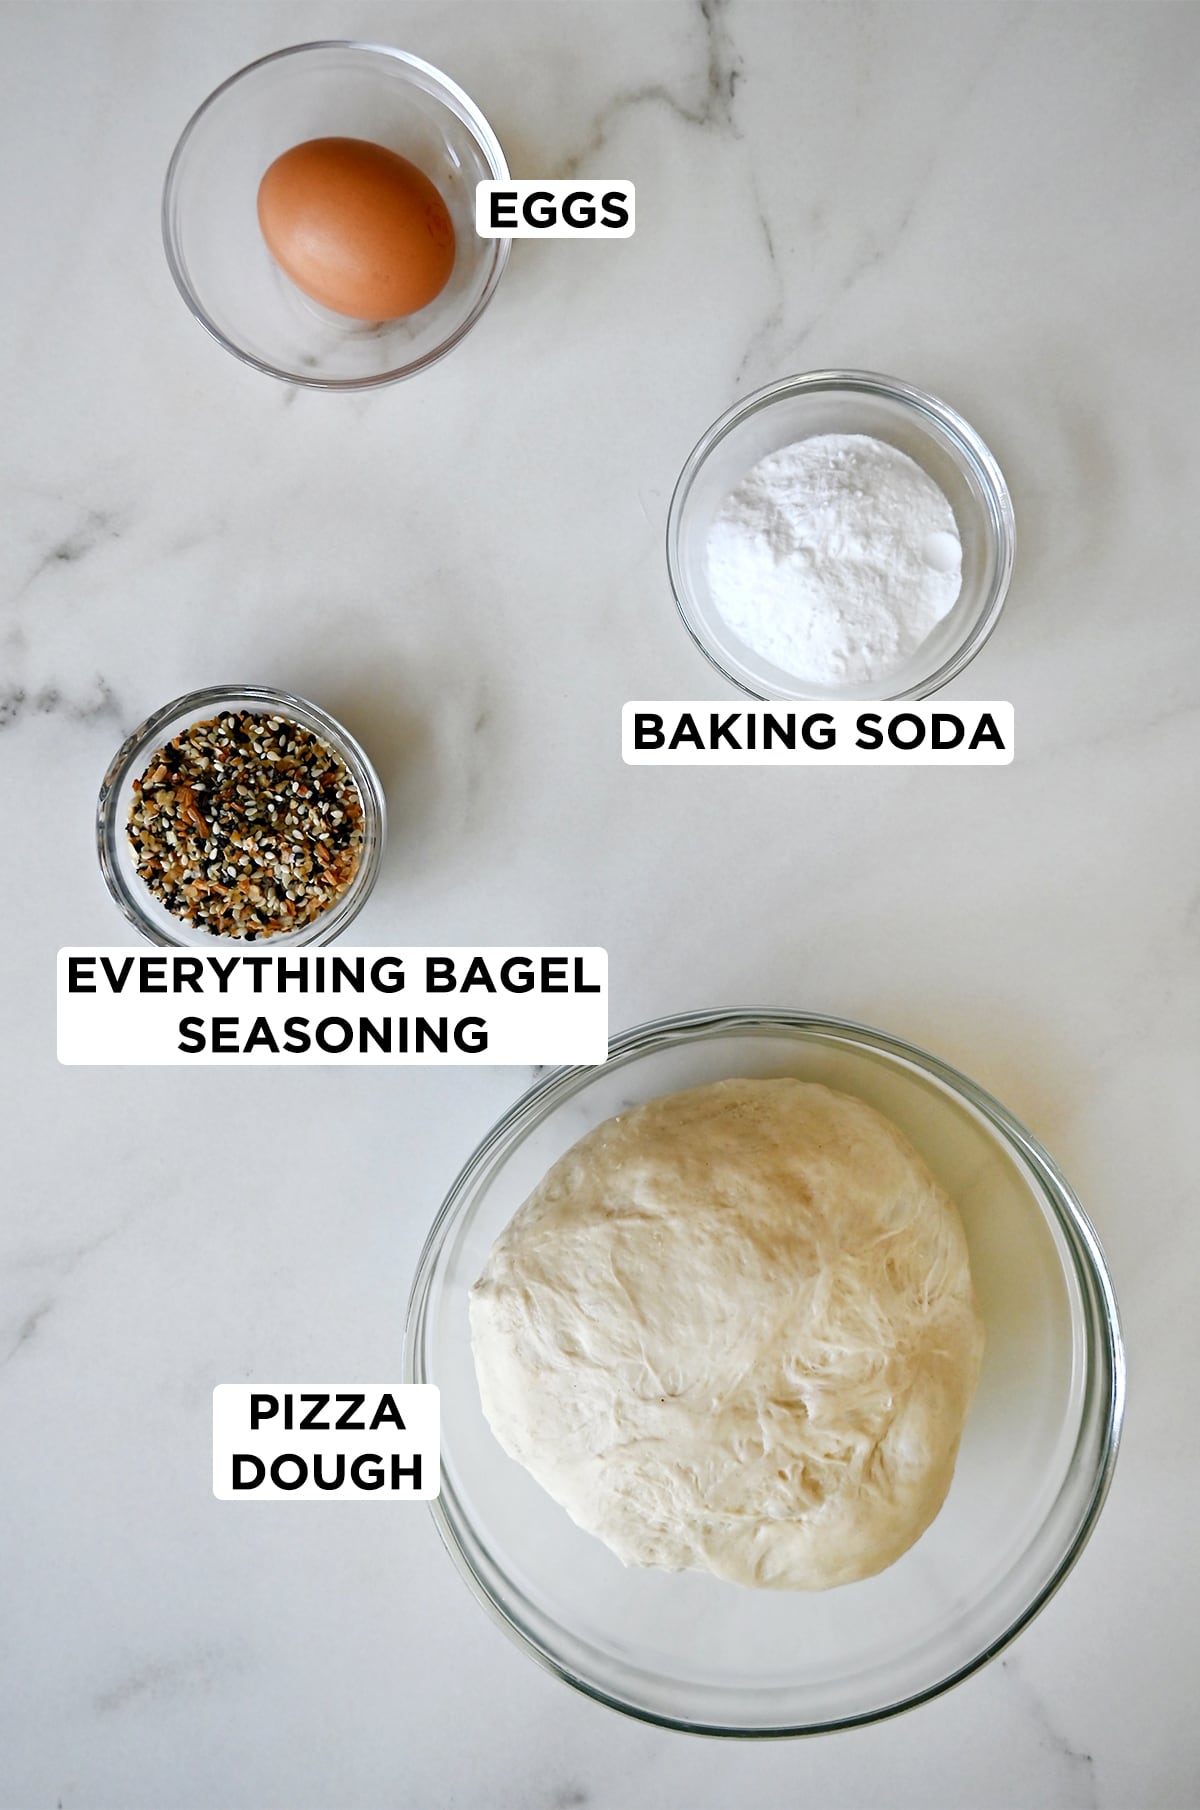 Various sizes of clear bowls containing an egg, baking soda, pizza dough and everything bagel seasoning.